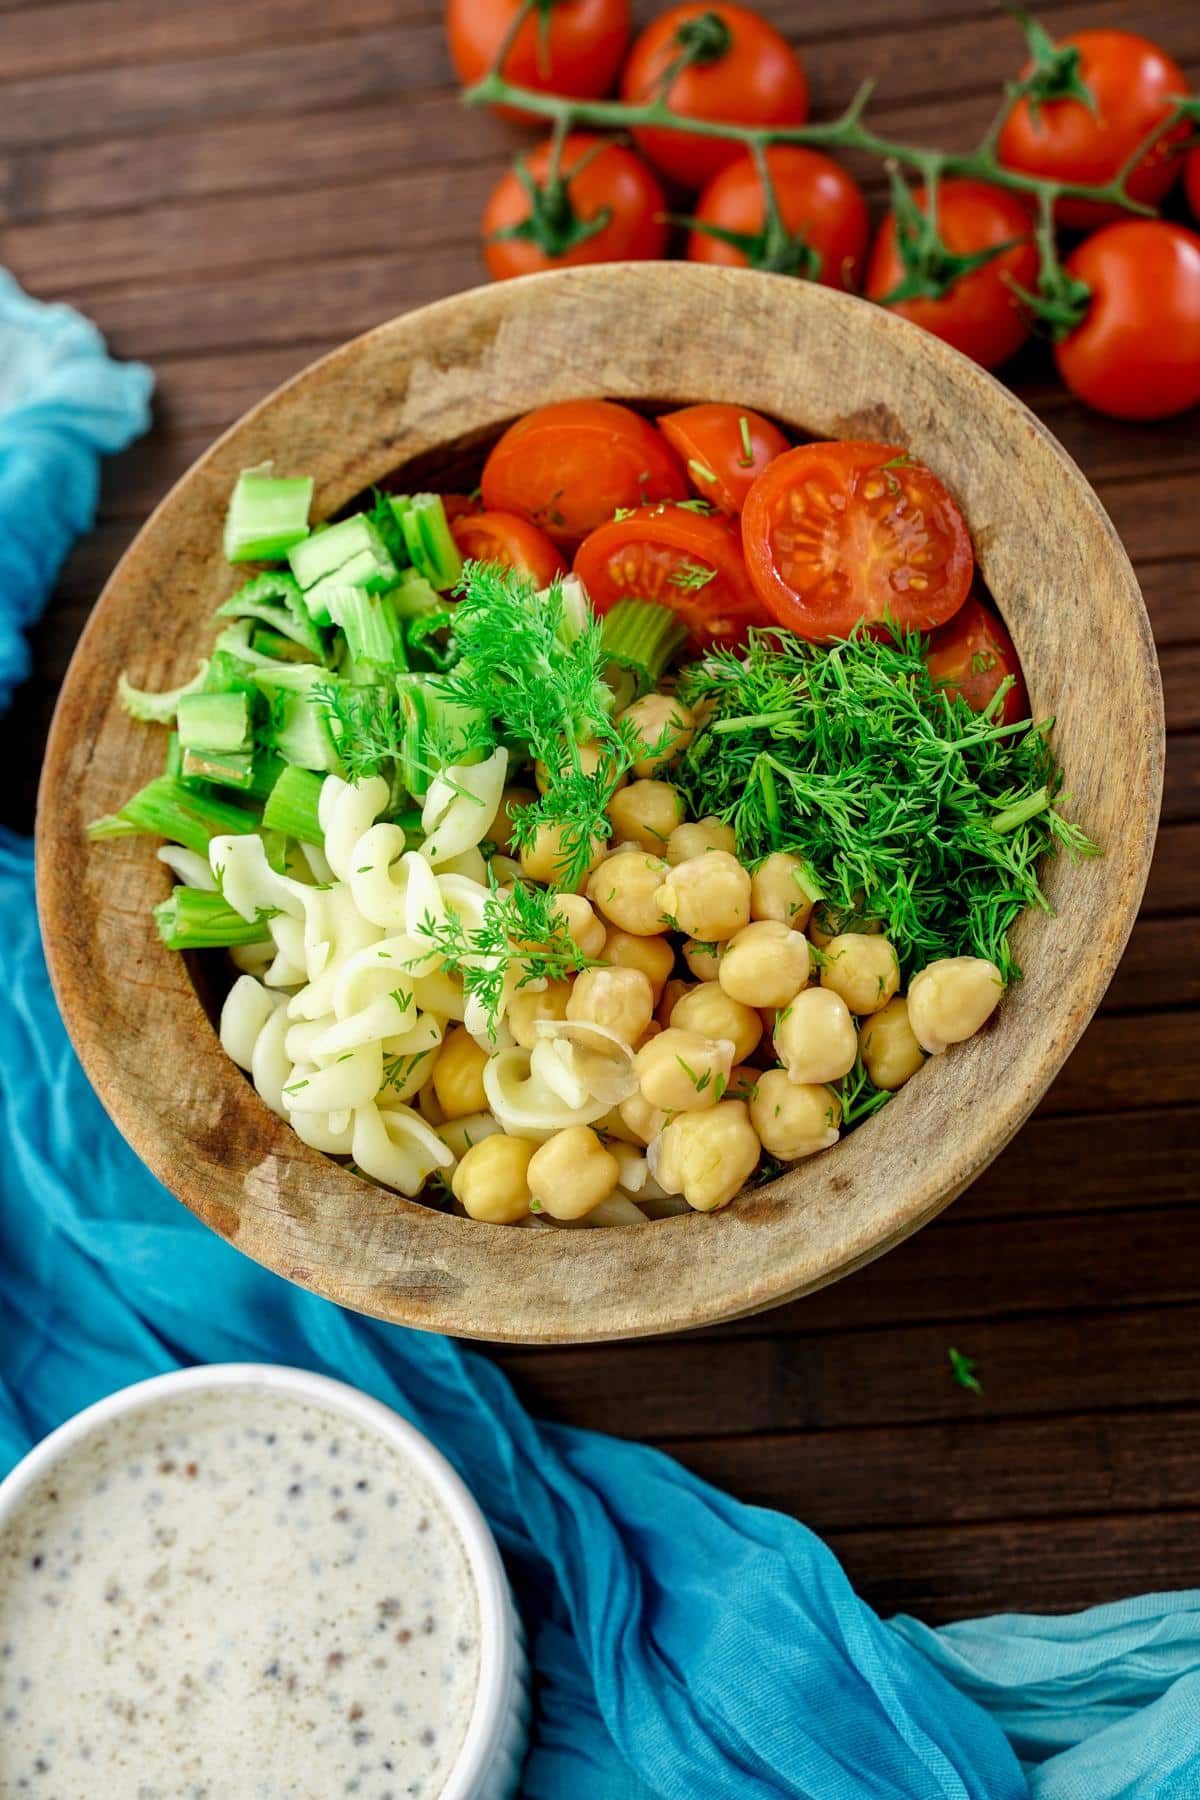 wood bowl filled with chickpeas, pasta, veggies and sauce on table by teal napkin